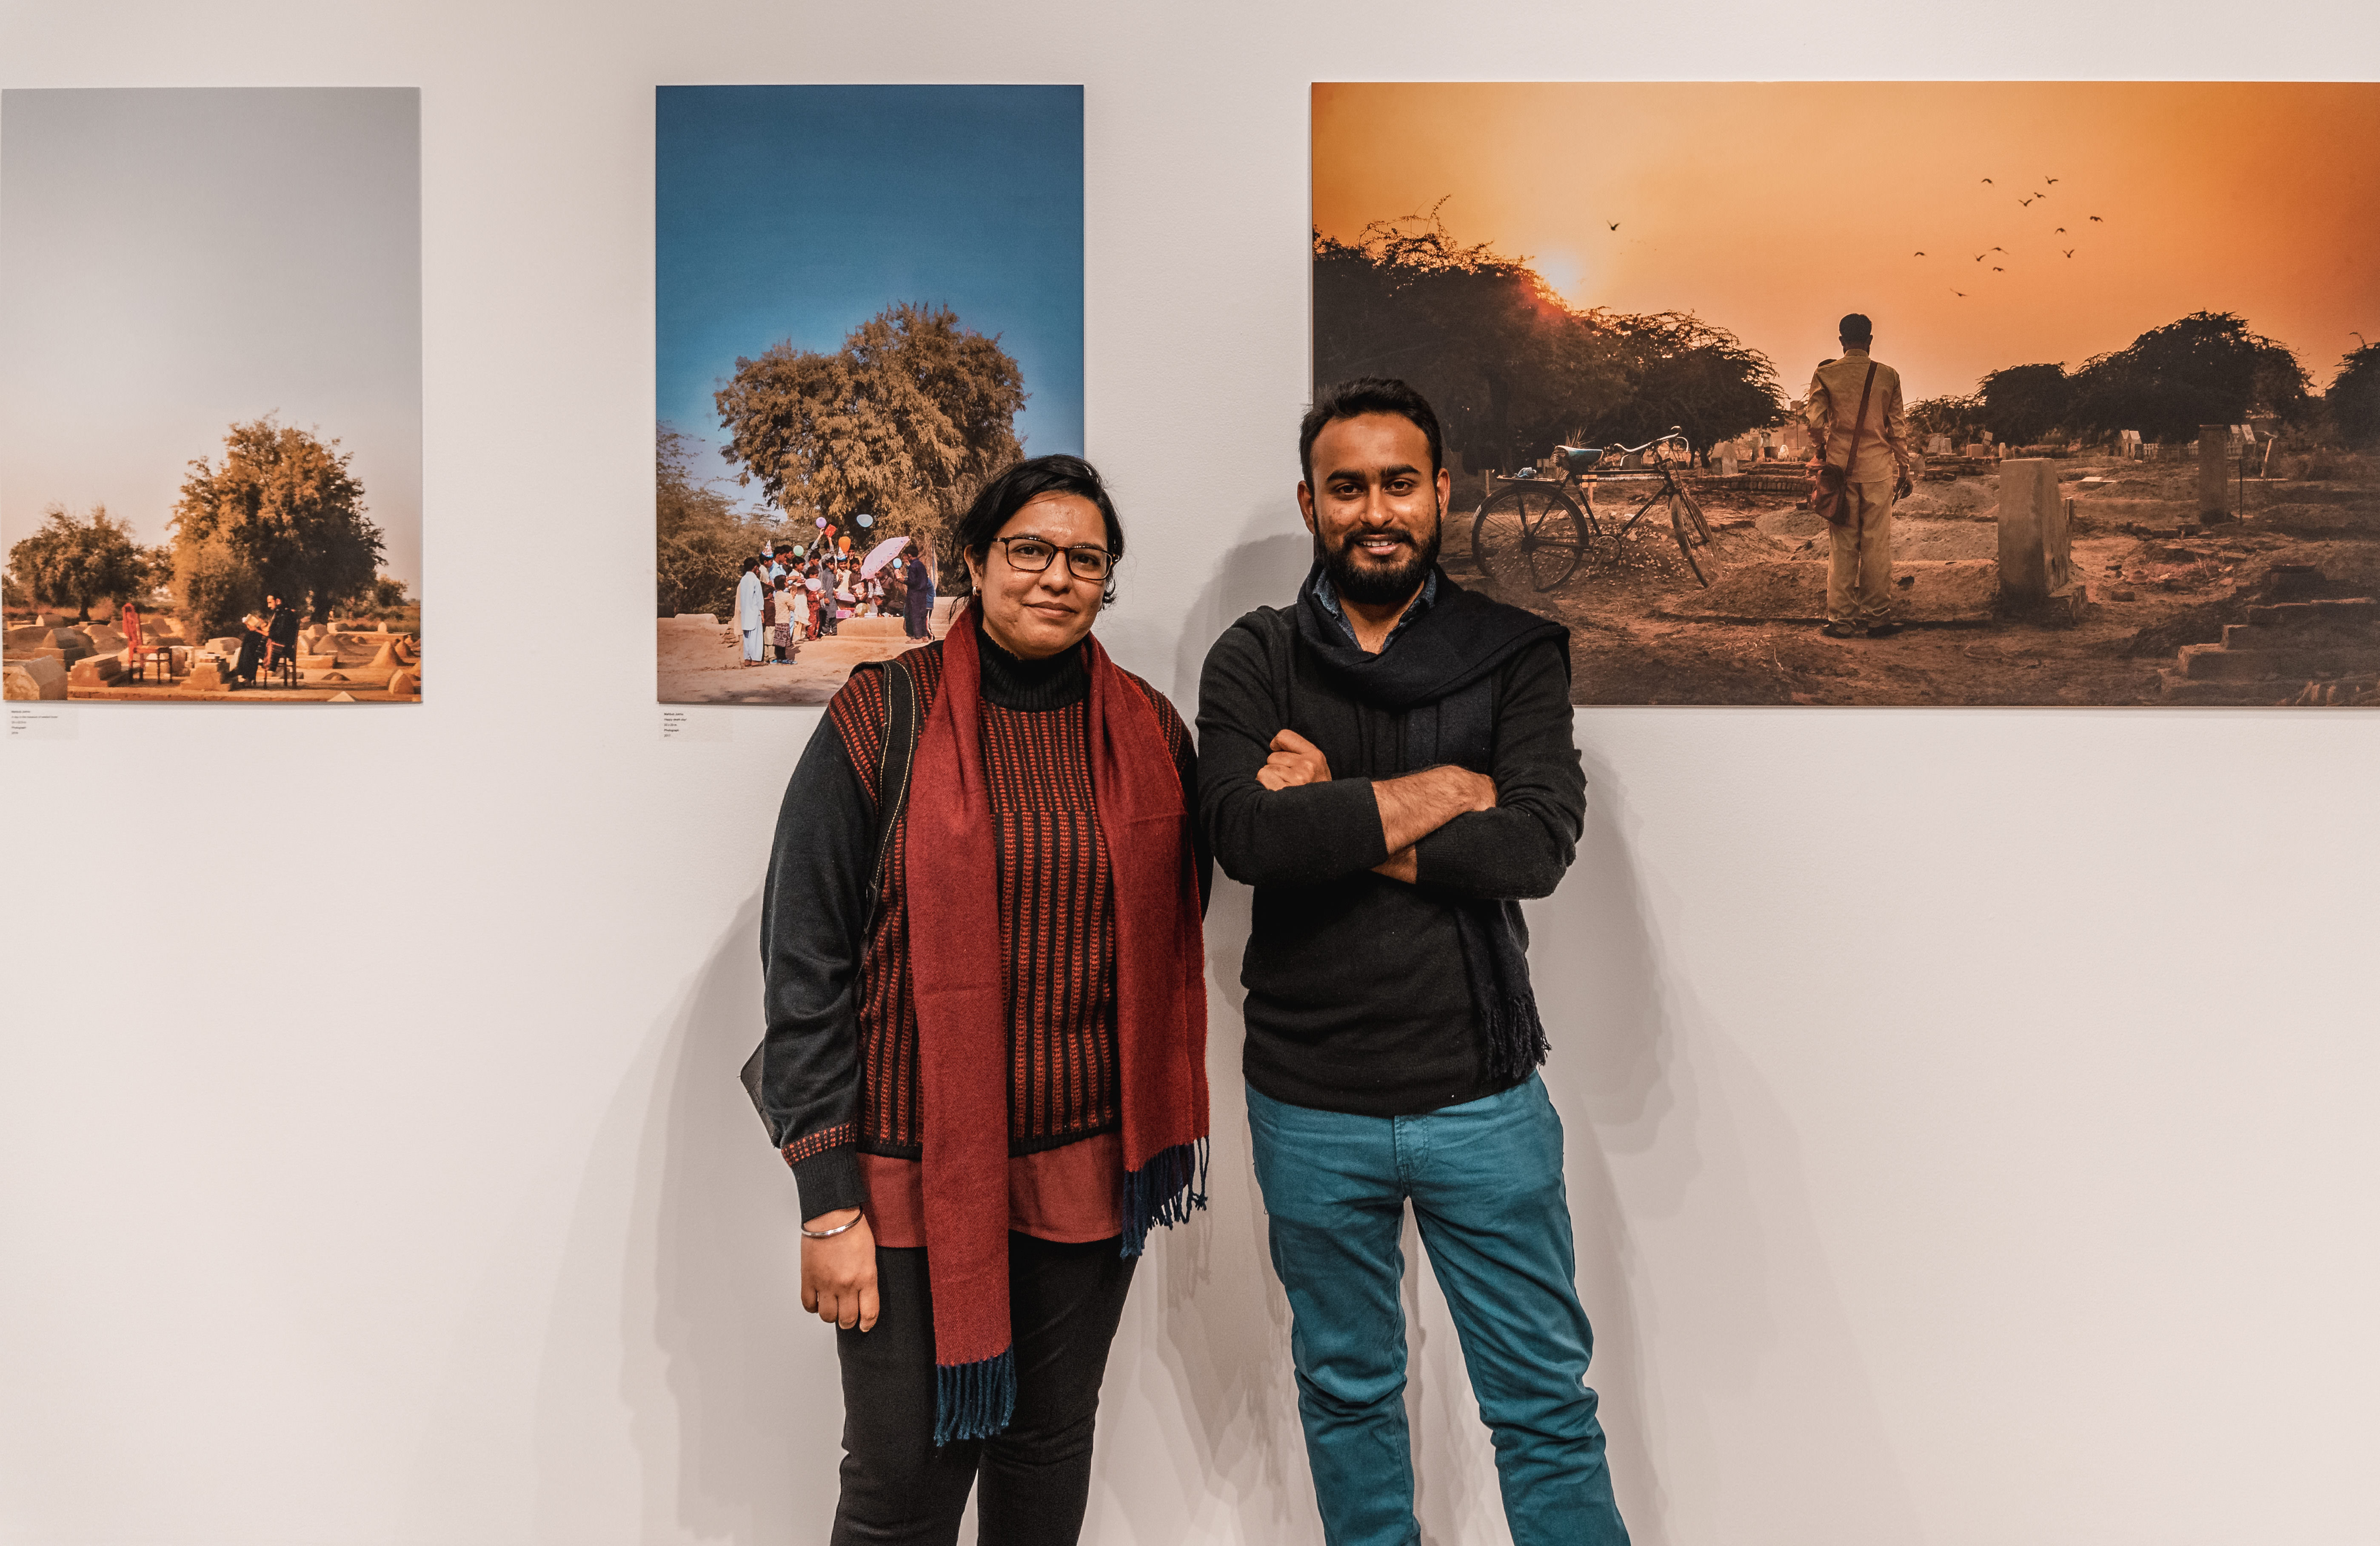 Krupa Makhija (left) and Mahboob Jokhio (right), the Mittal Institute’s Spring 2019 Visiting Artist Fellows, pose in front of Jokhio’s art at an exhibition of their work.